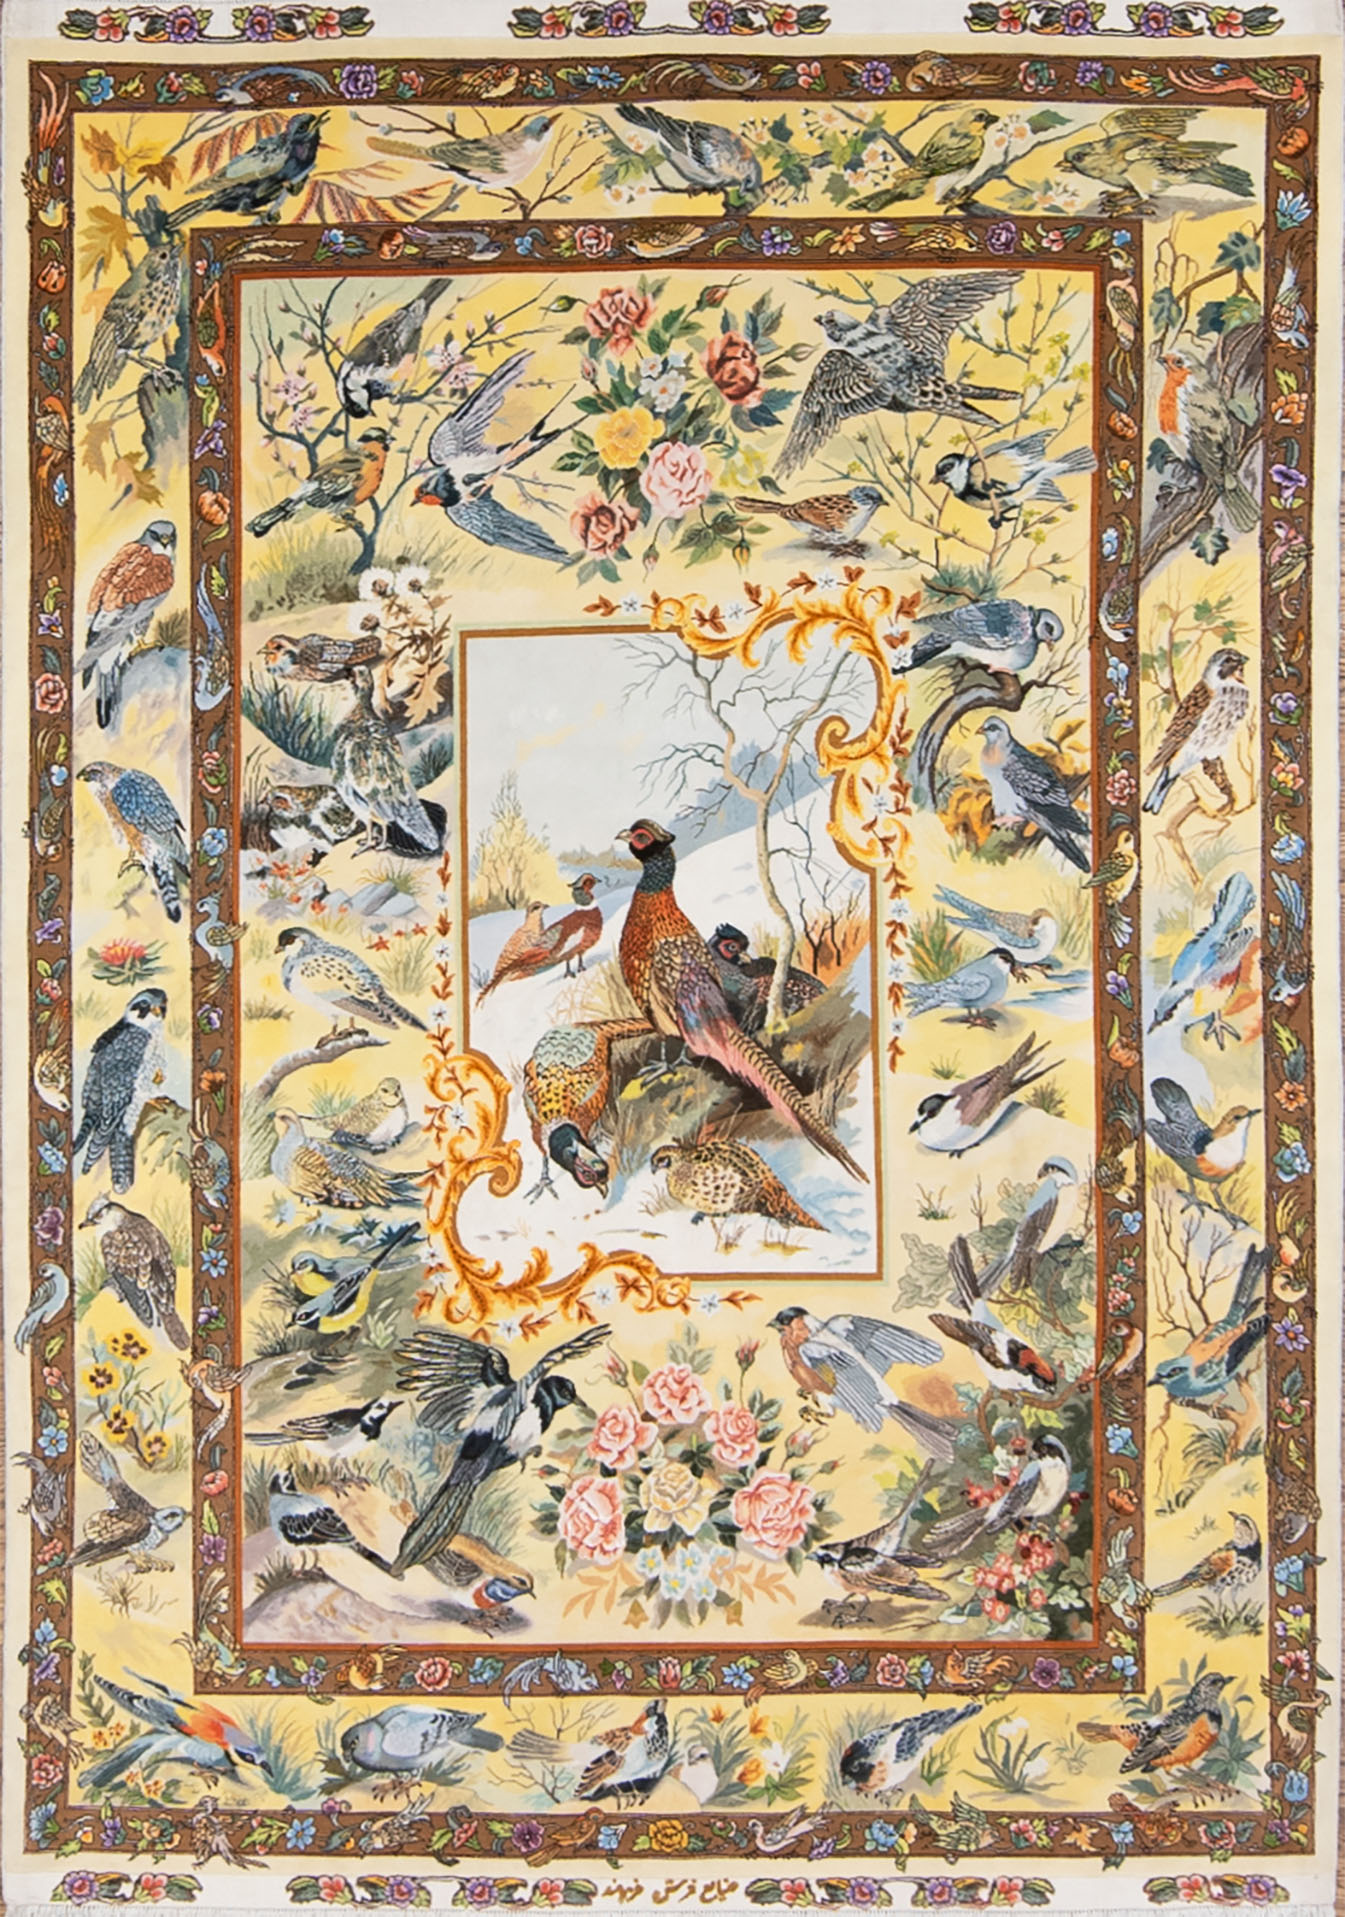 Hand Knotted Persian Tabriz rug, Bevy of Birds Rug, Scenery Rug, Artwork of Iran Rugs, Festival of Birds, size 5x7.